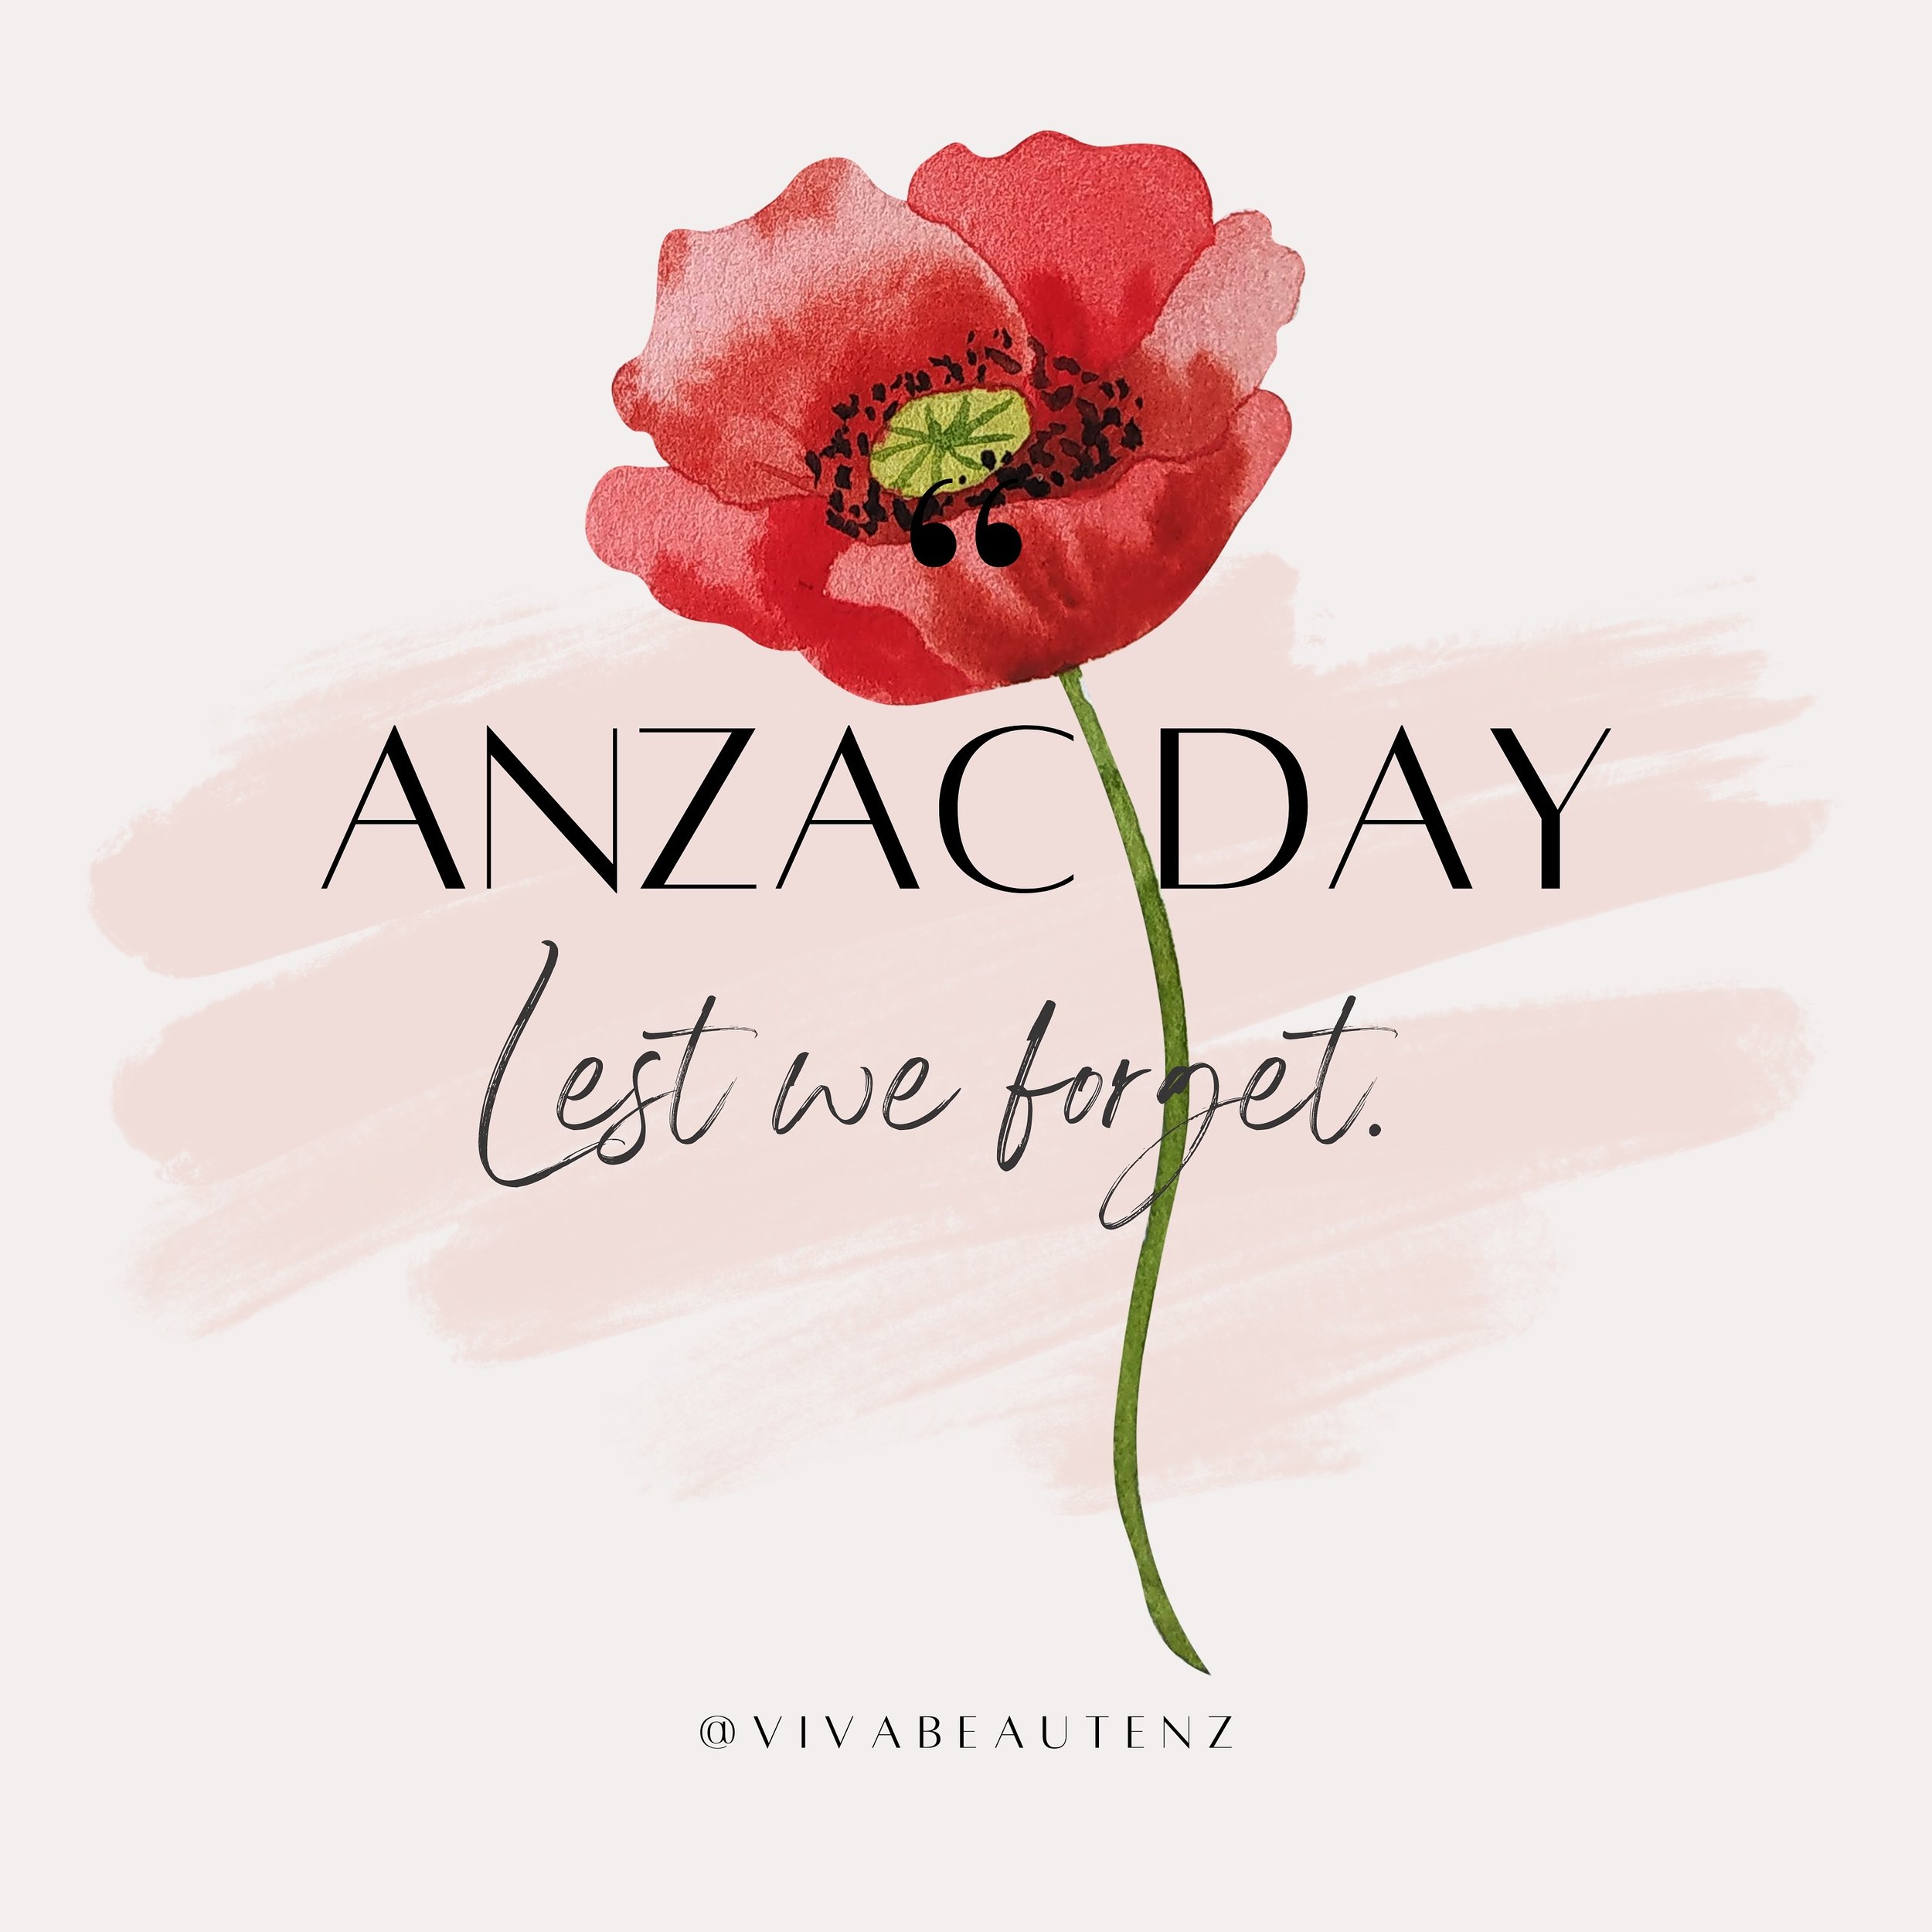 On this ANZAC Day, we pause to remember and pay tribute to the courage and selflessness of those who served and continue to serve. Let us cherish the freedom they fought so valiantly to protect. Lest we forget. 🇳🇿🌺

Please note that our clinics ar